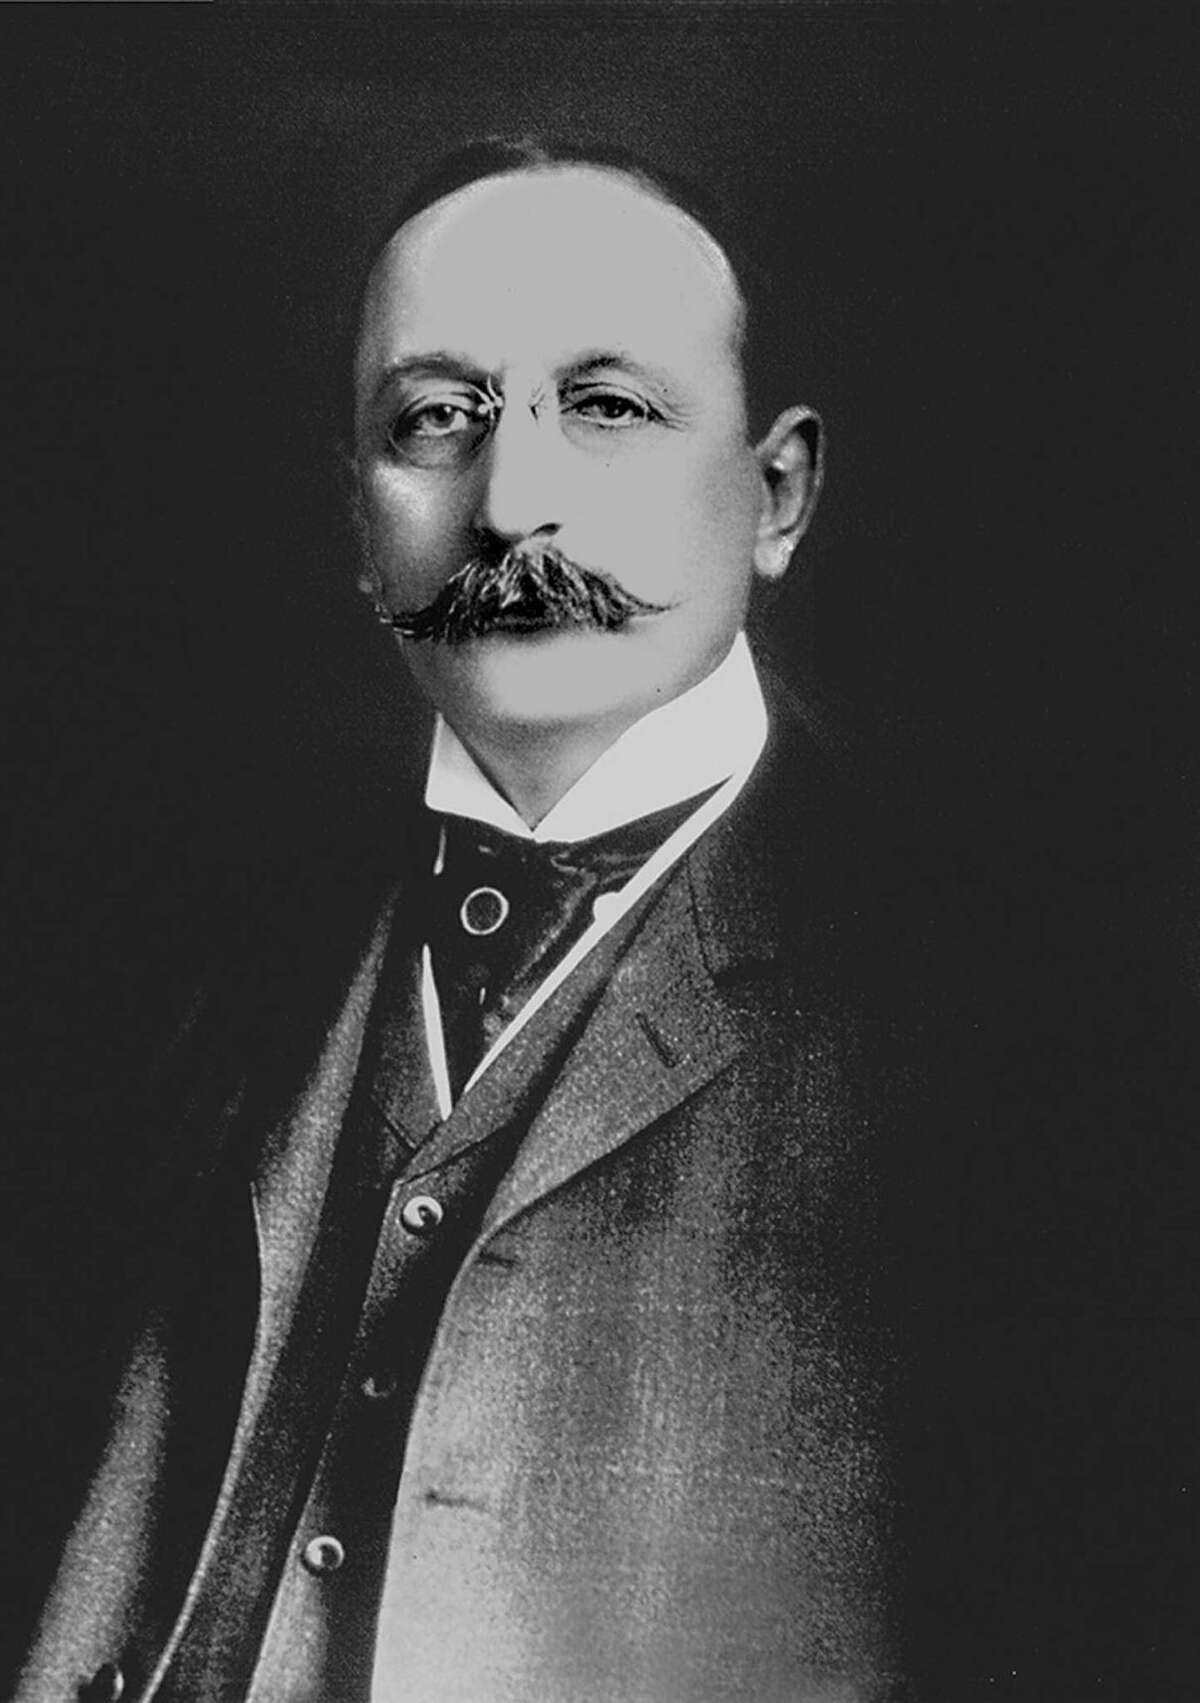 Architect Cass Gilbert bought the old tavern in 1907. A Ridgefield commission opted not to name a new cultural award after Gilbert after one member encouraged the commission to be more diverse, rather than selecting an "old white guy" for the award's name.